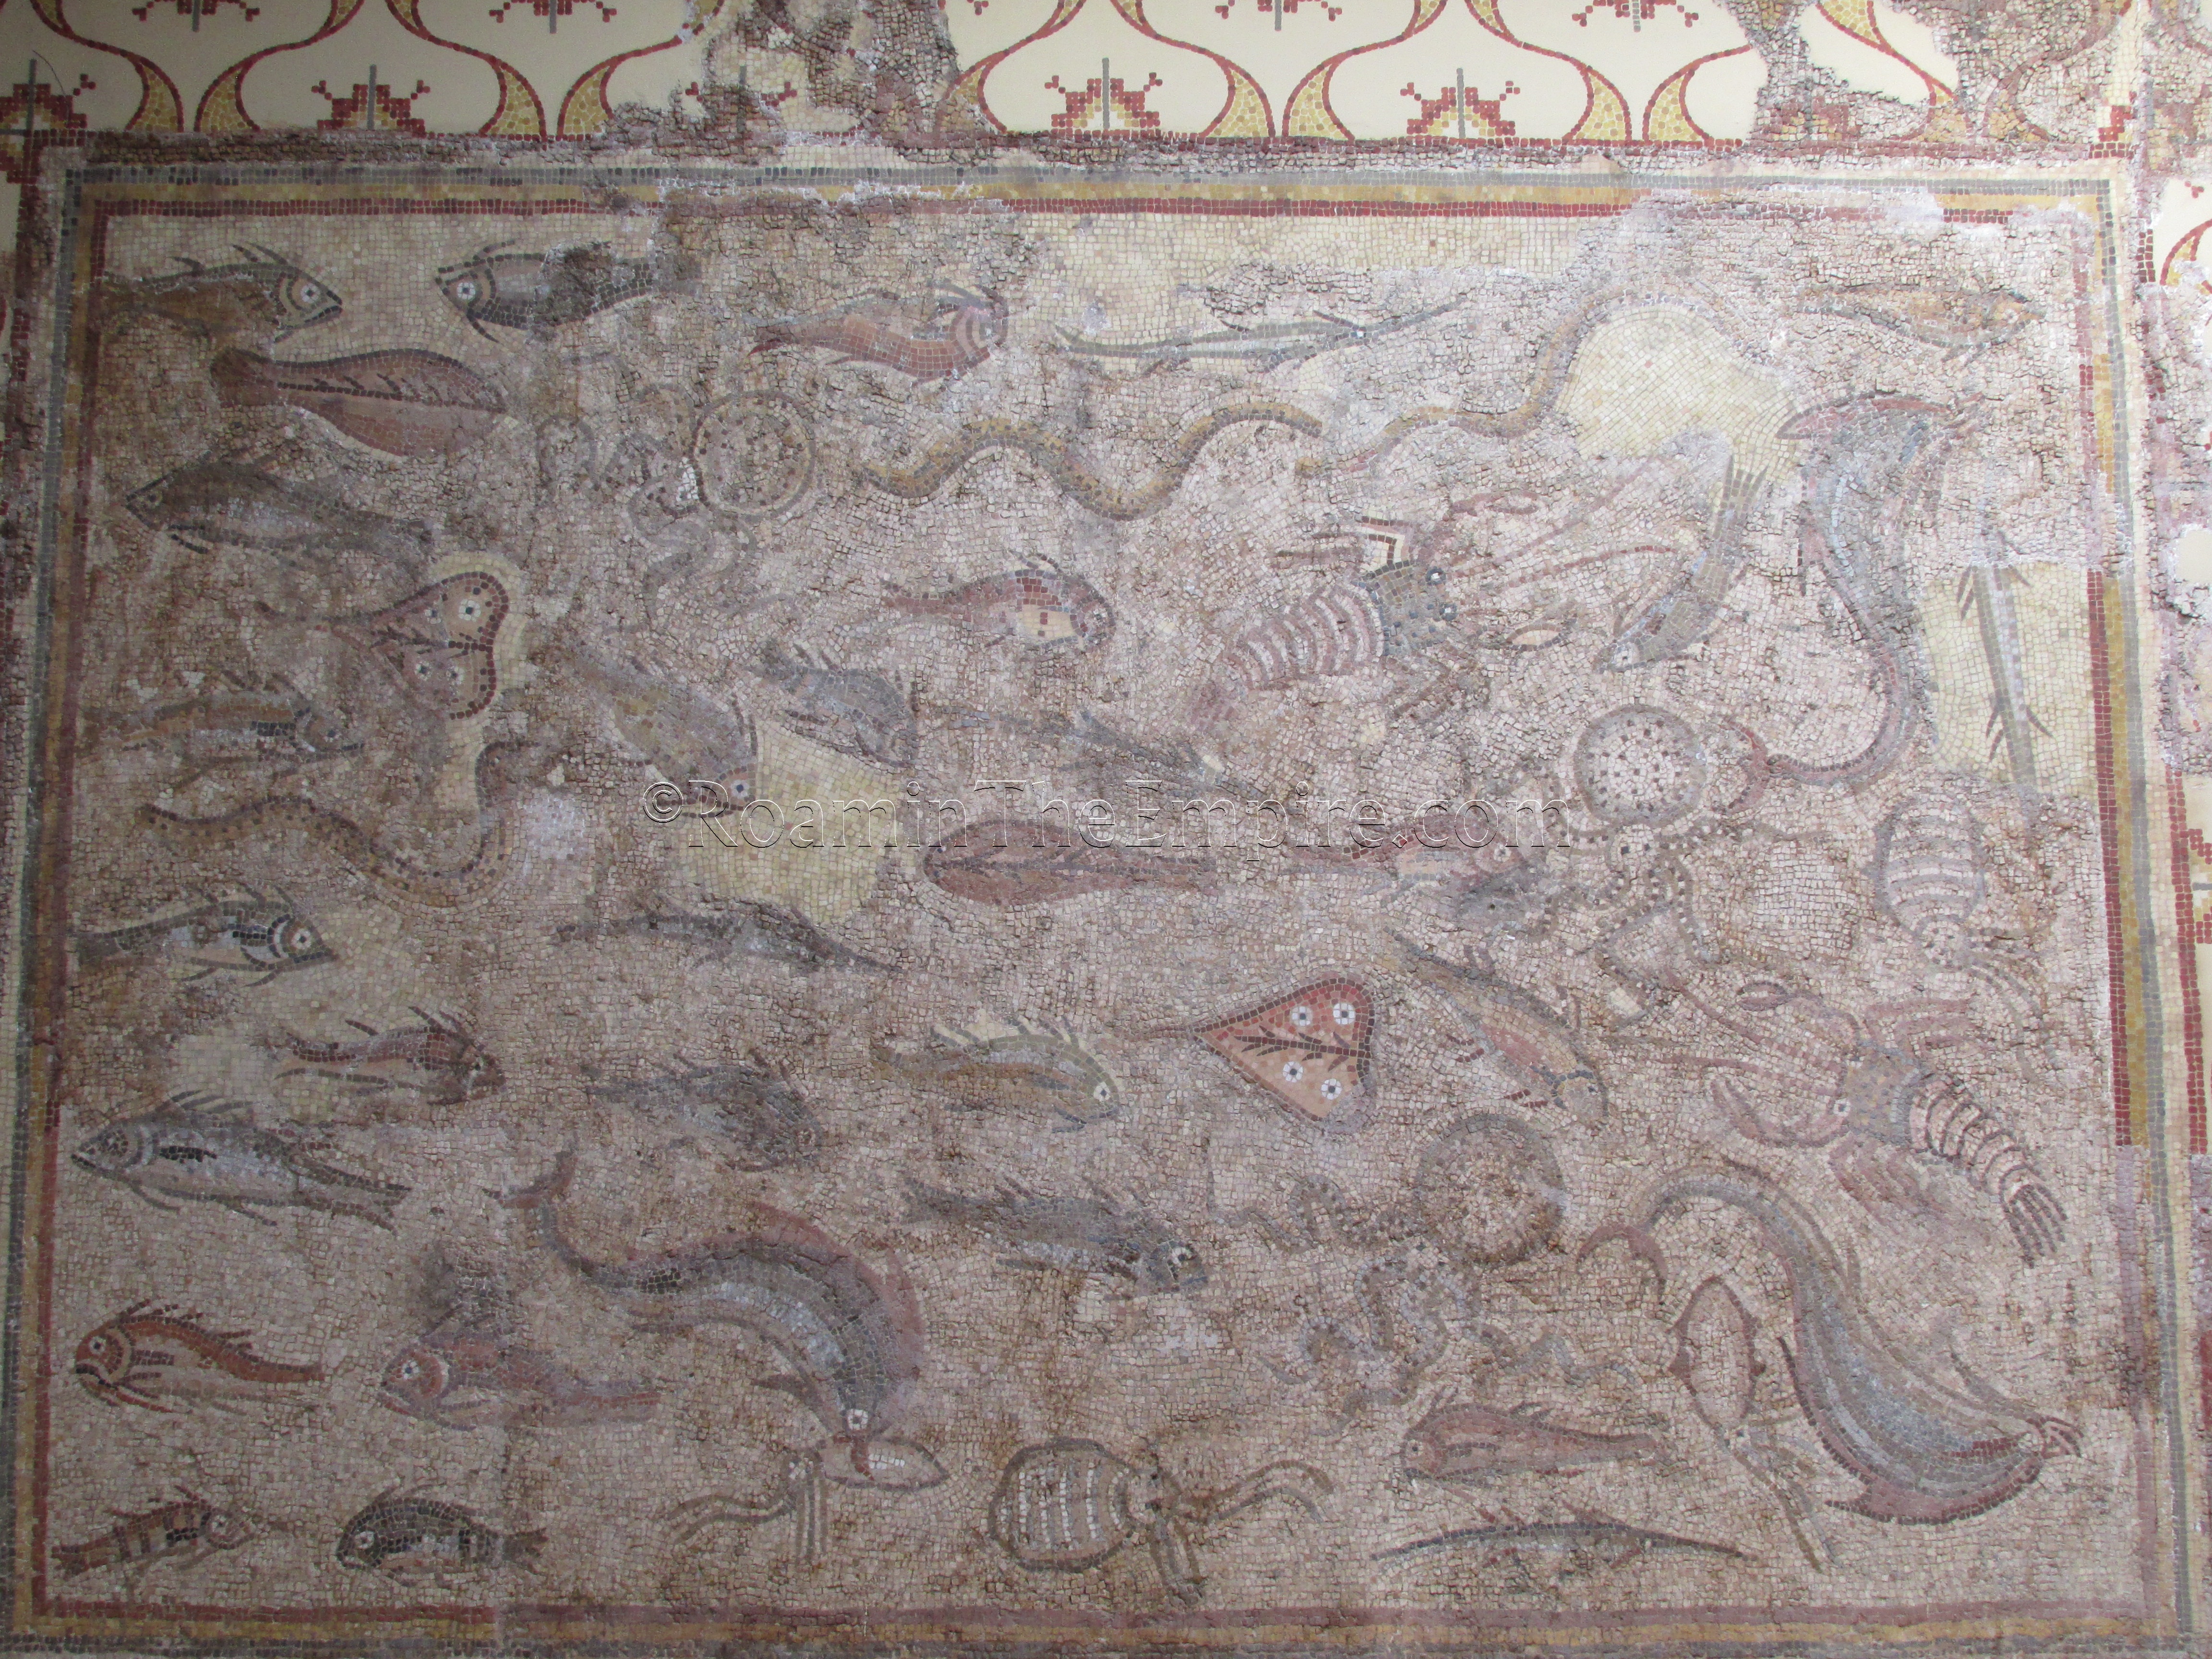 Sea life mosaic from a villa in Pineda, displayed in the MNAT.